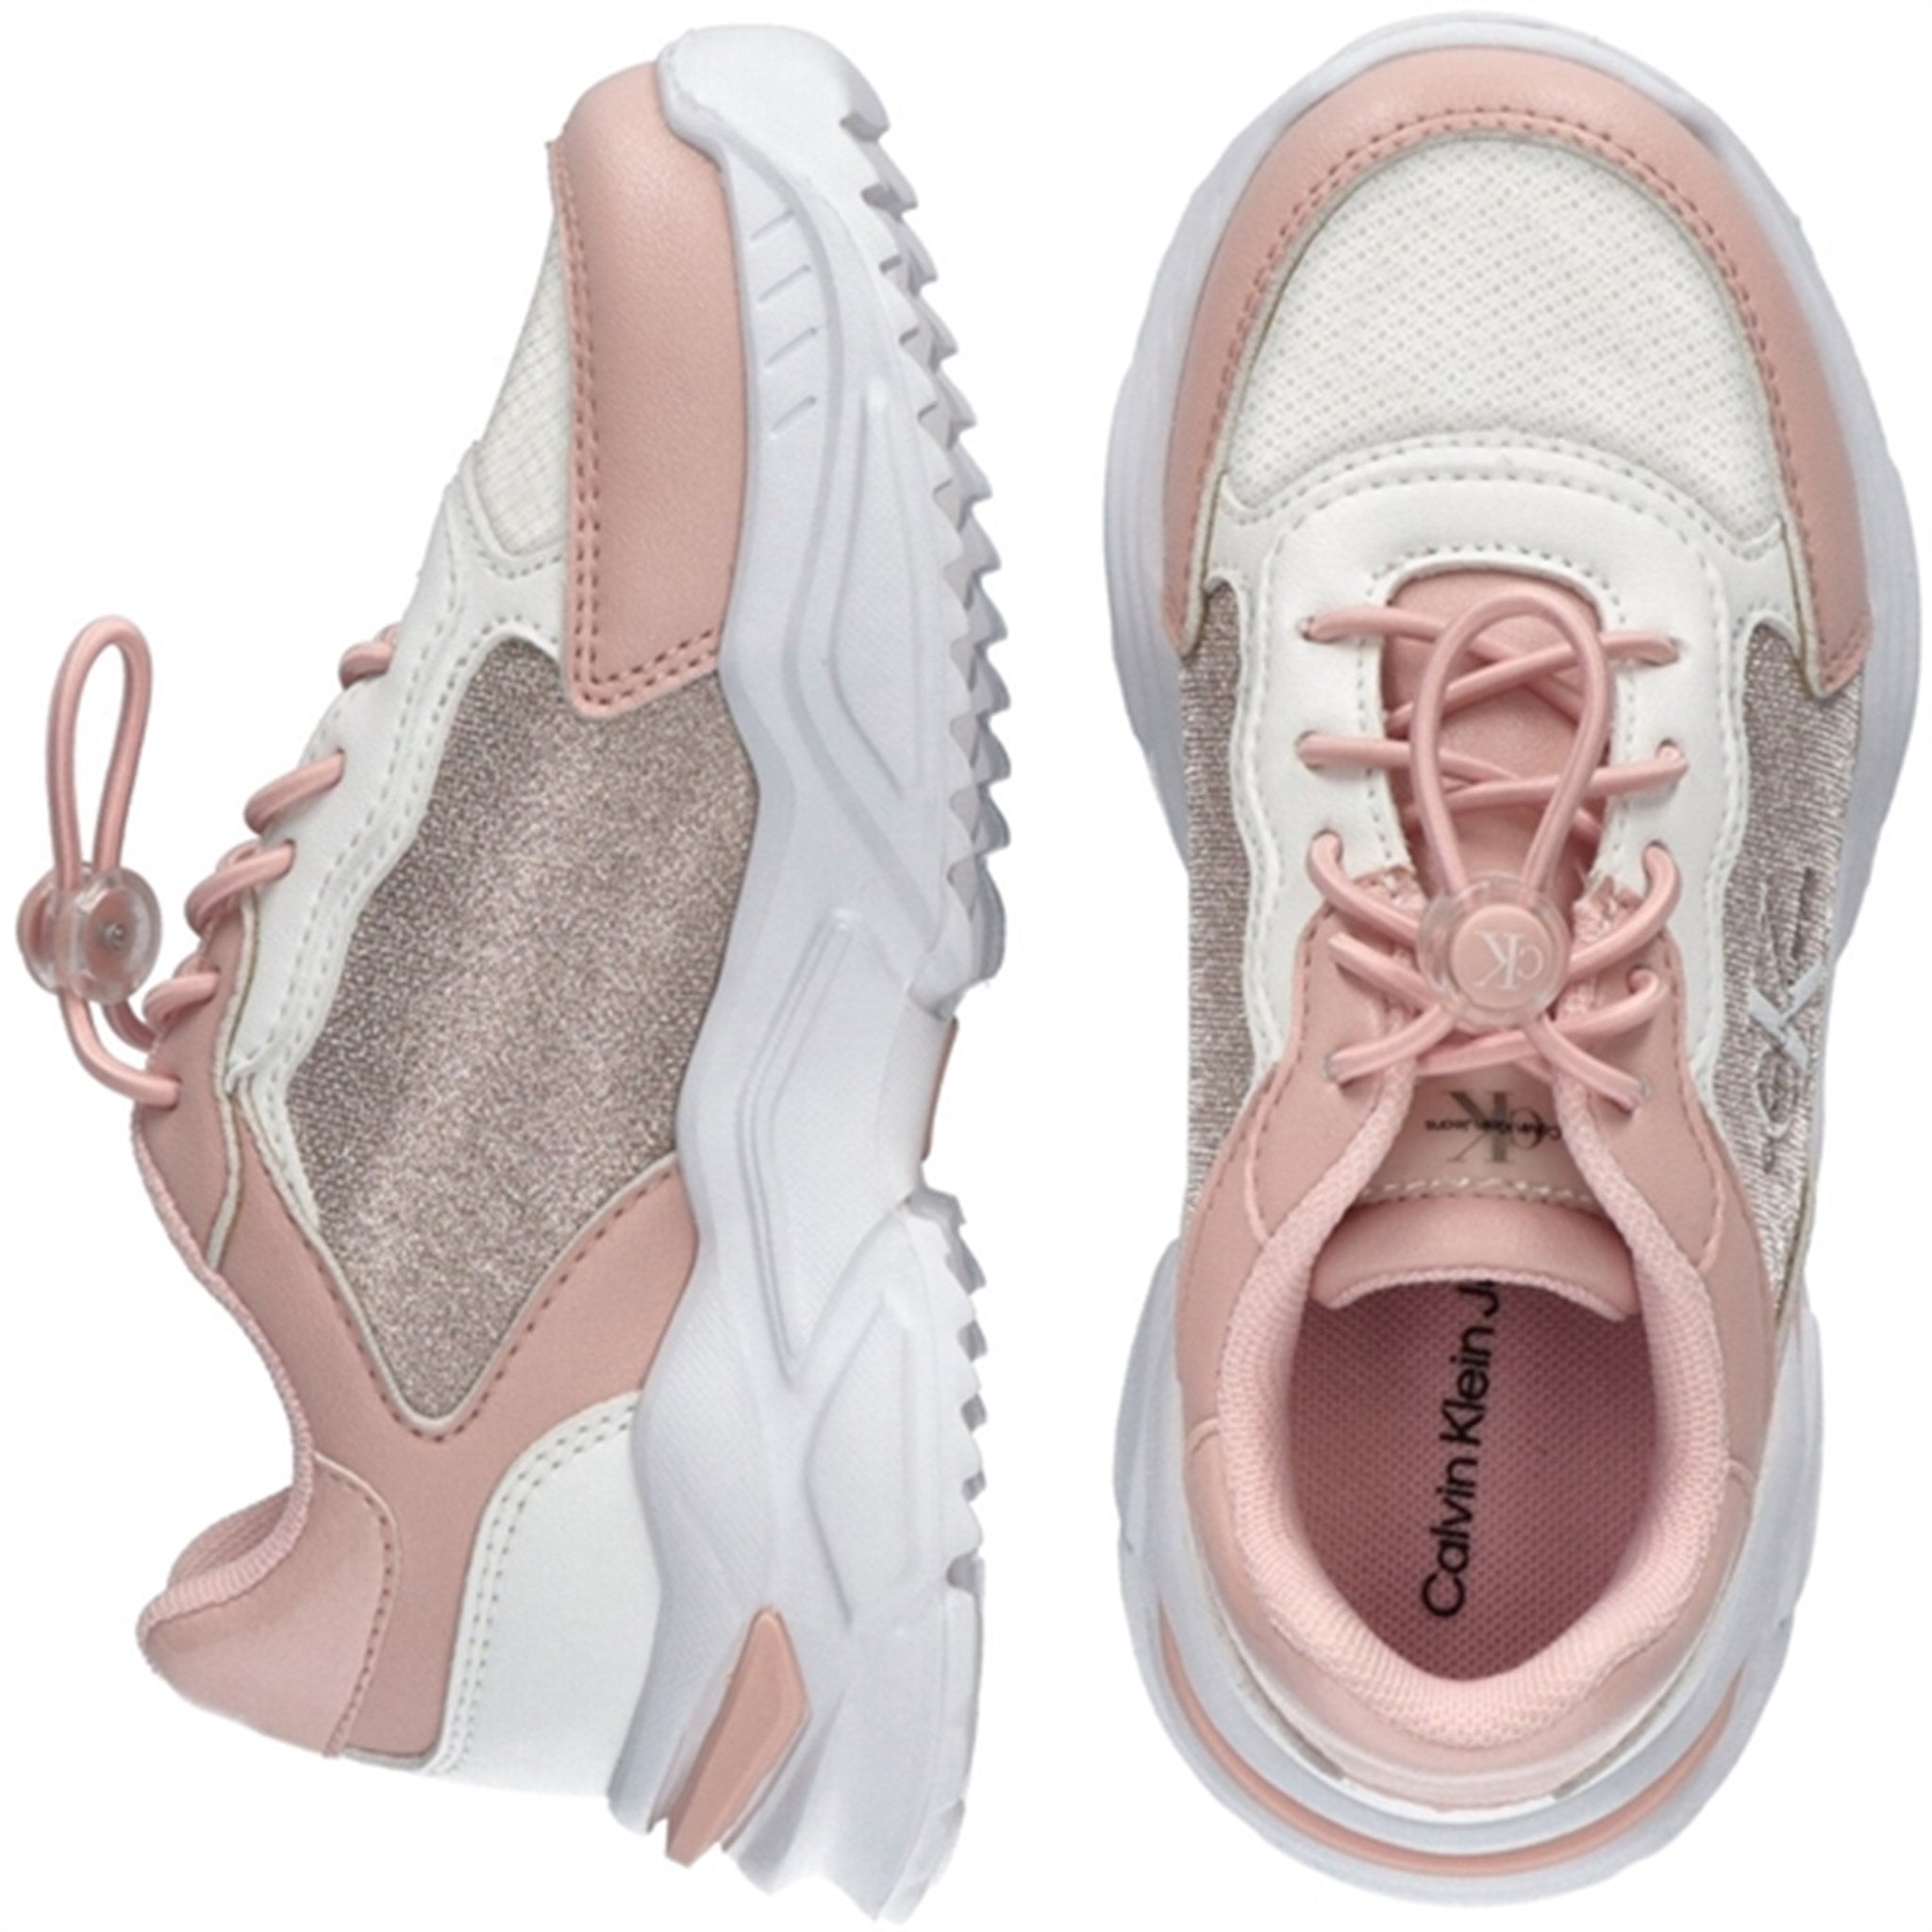 Calvin Klein Low Cut Lace-Up Sneakers Pink/White 2